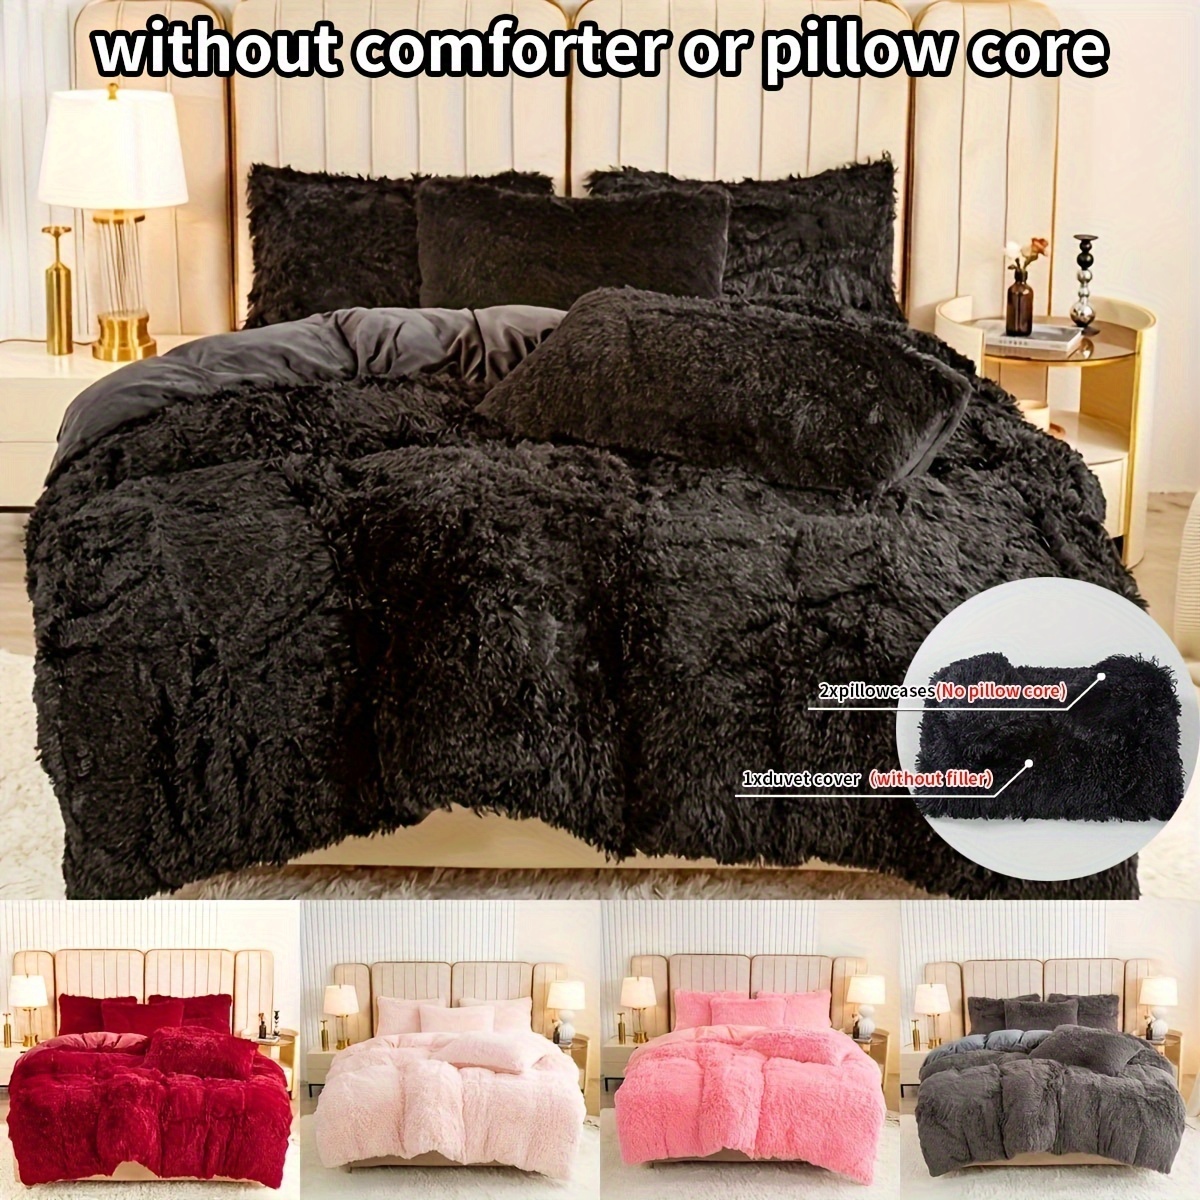 

3pcs Soft And Fluffy Luxury Duvet Cover Set - Perfect For Bedroom, Guest Room, And Dorm Decor - Includes 1 Duvet Cover And 2 Pillowcases (core Not Included)